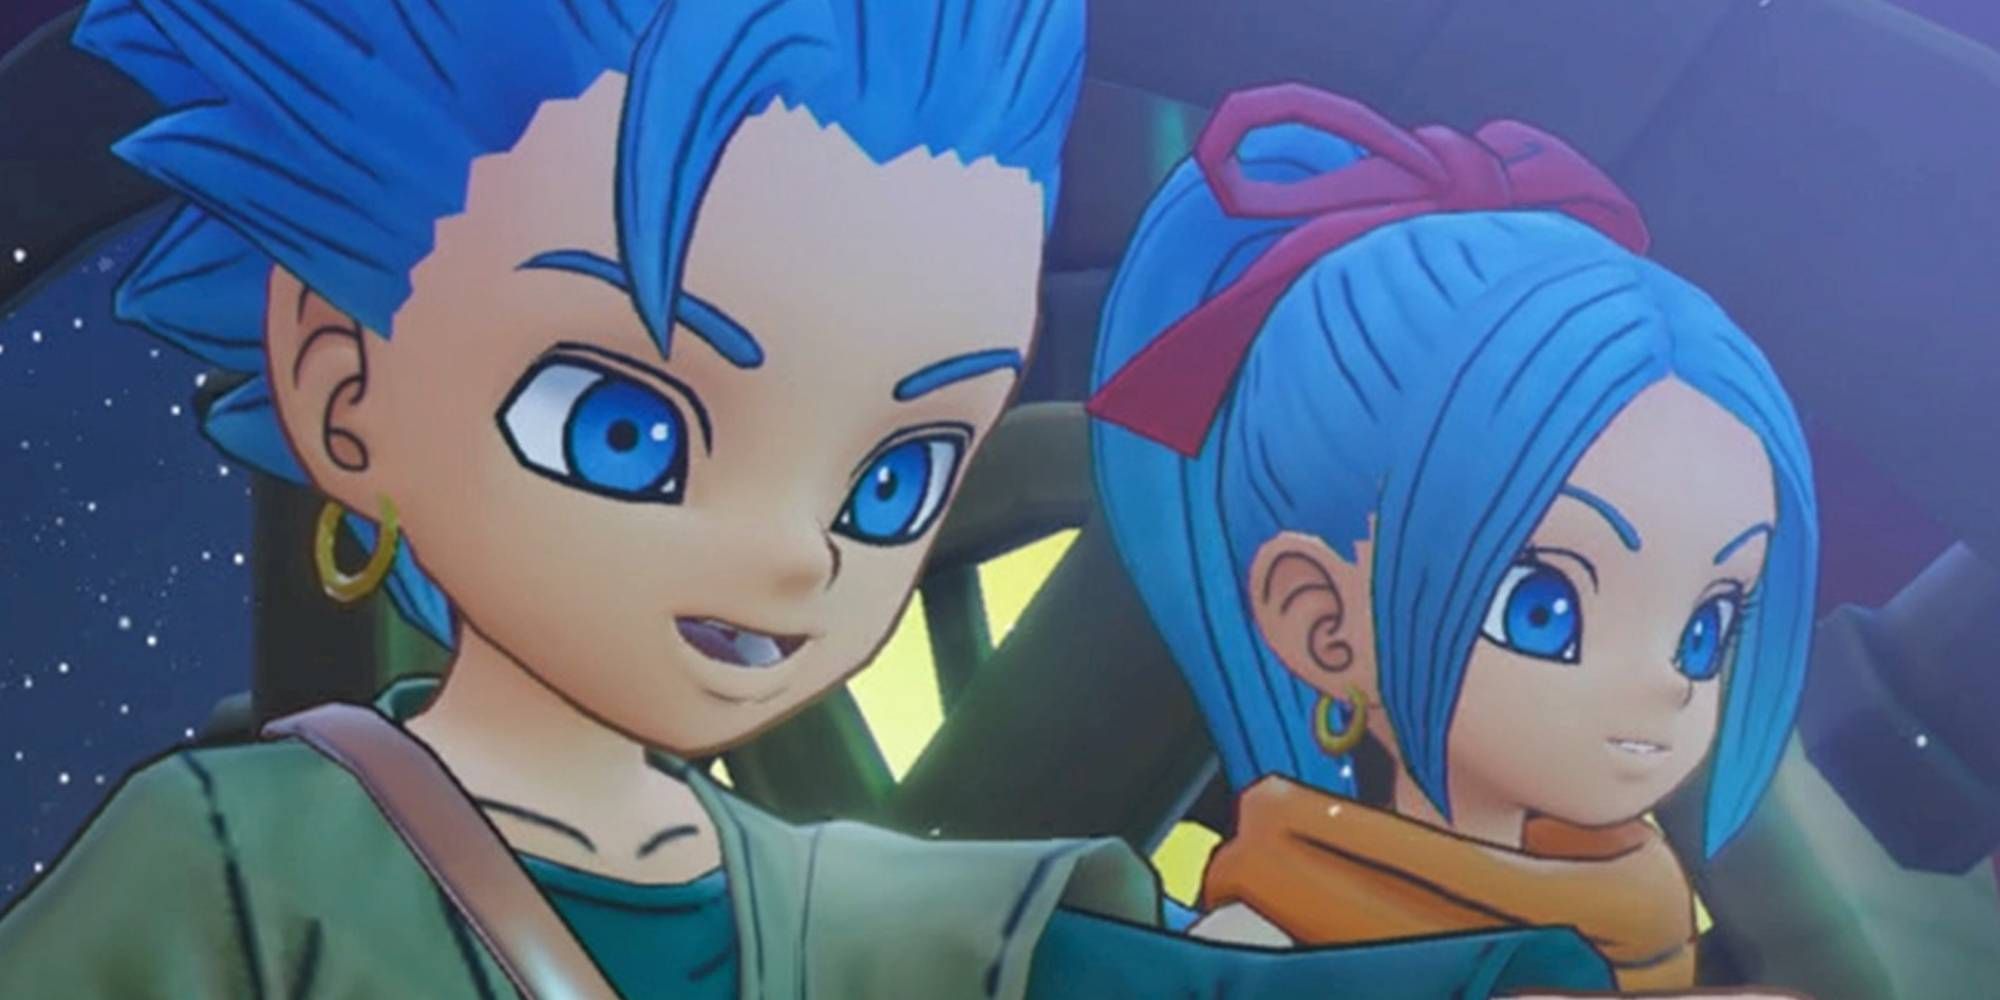 Dragon Quest Treasures Mia and Erik, the main characters, arriving in Draconia near the beginning of the game.